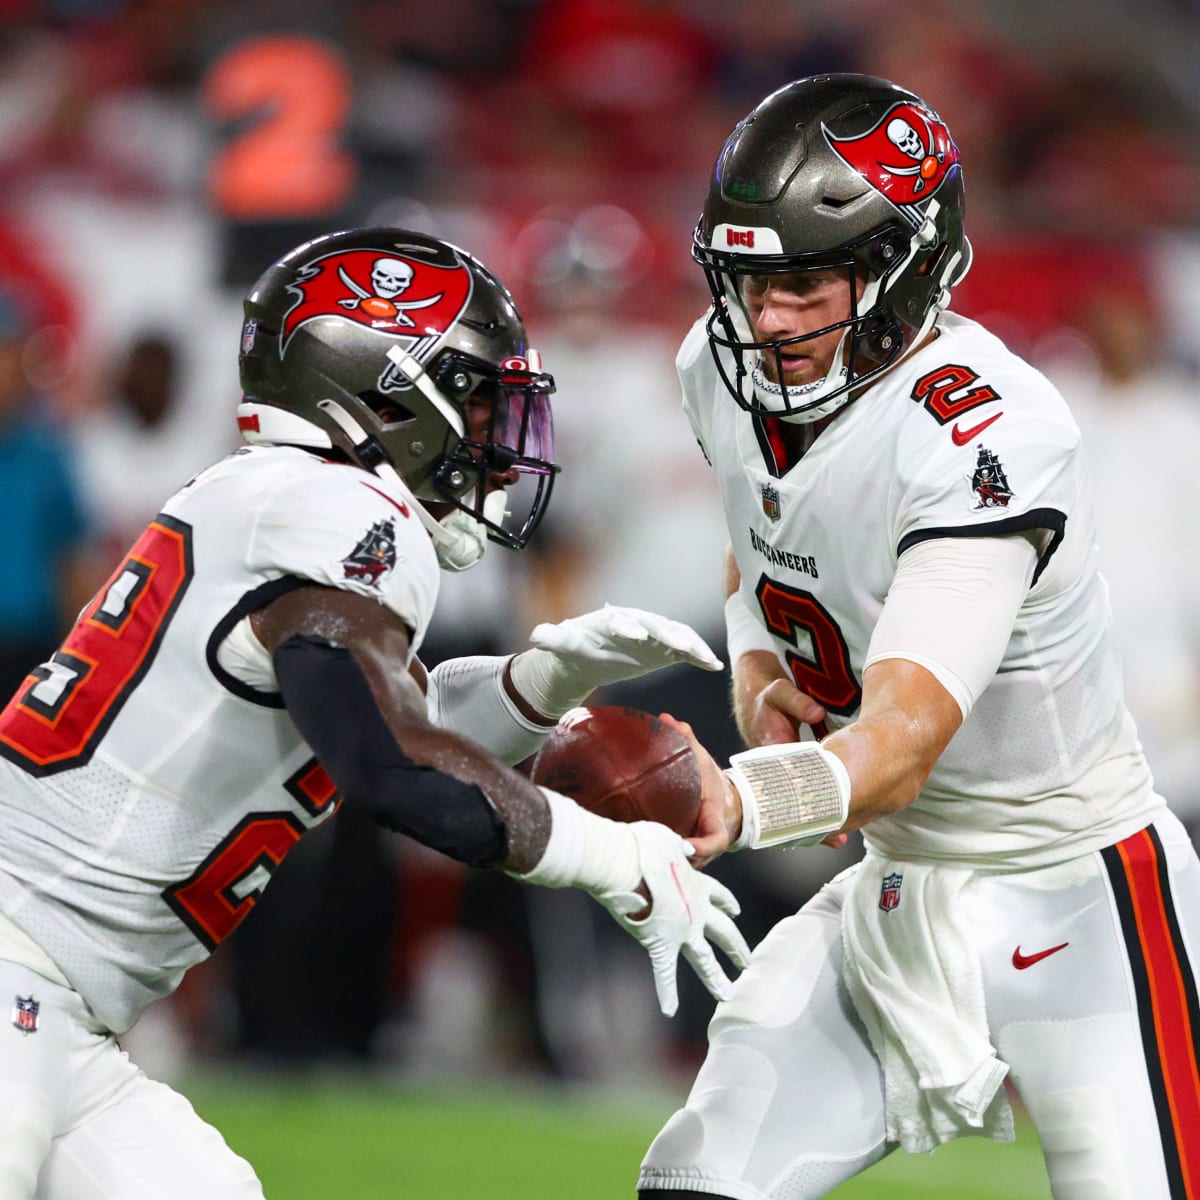 Young Bucs Talent Shines in Loss to Dolphins to Open Preseason